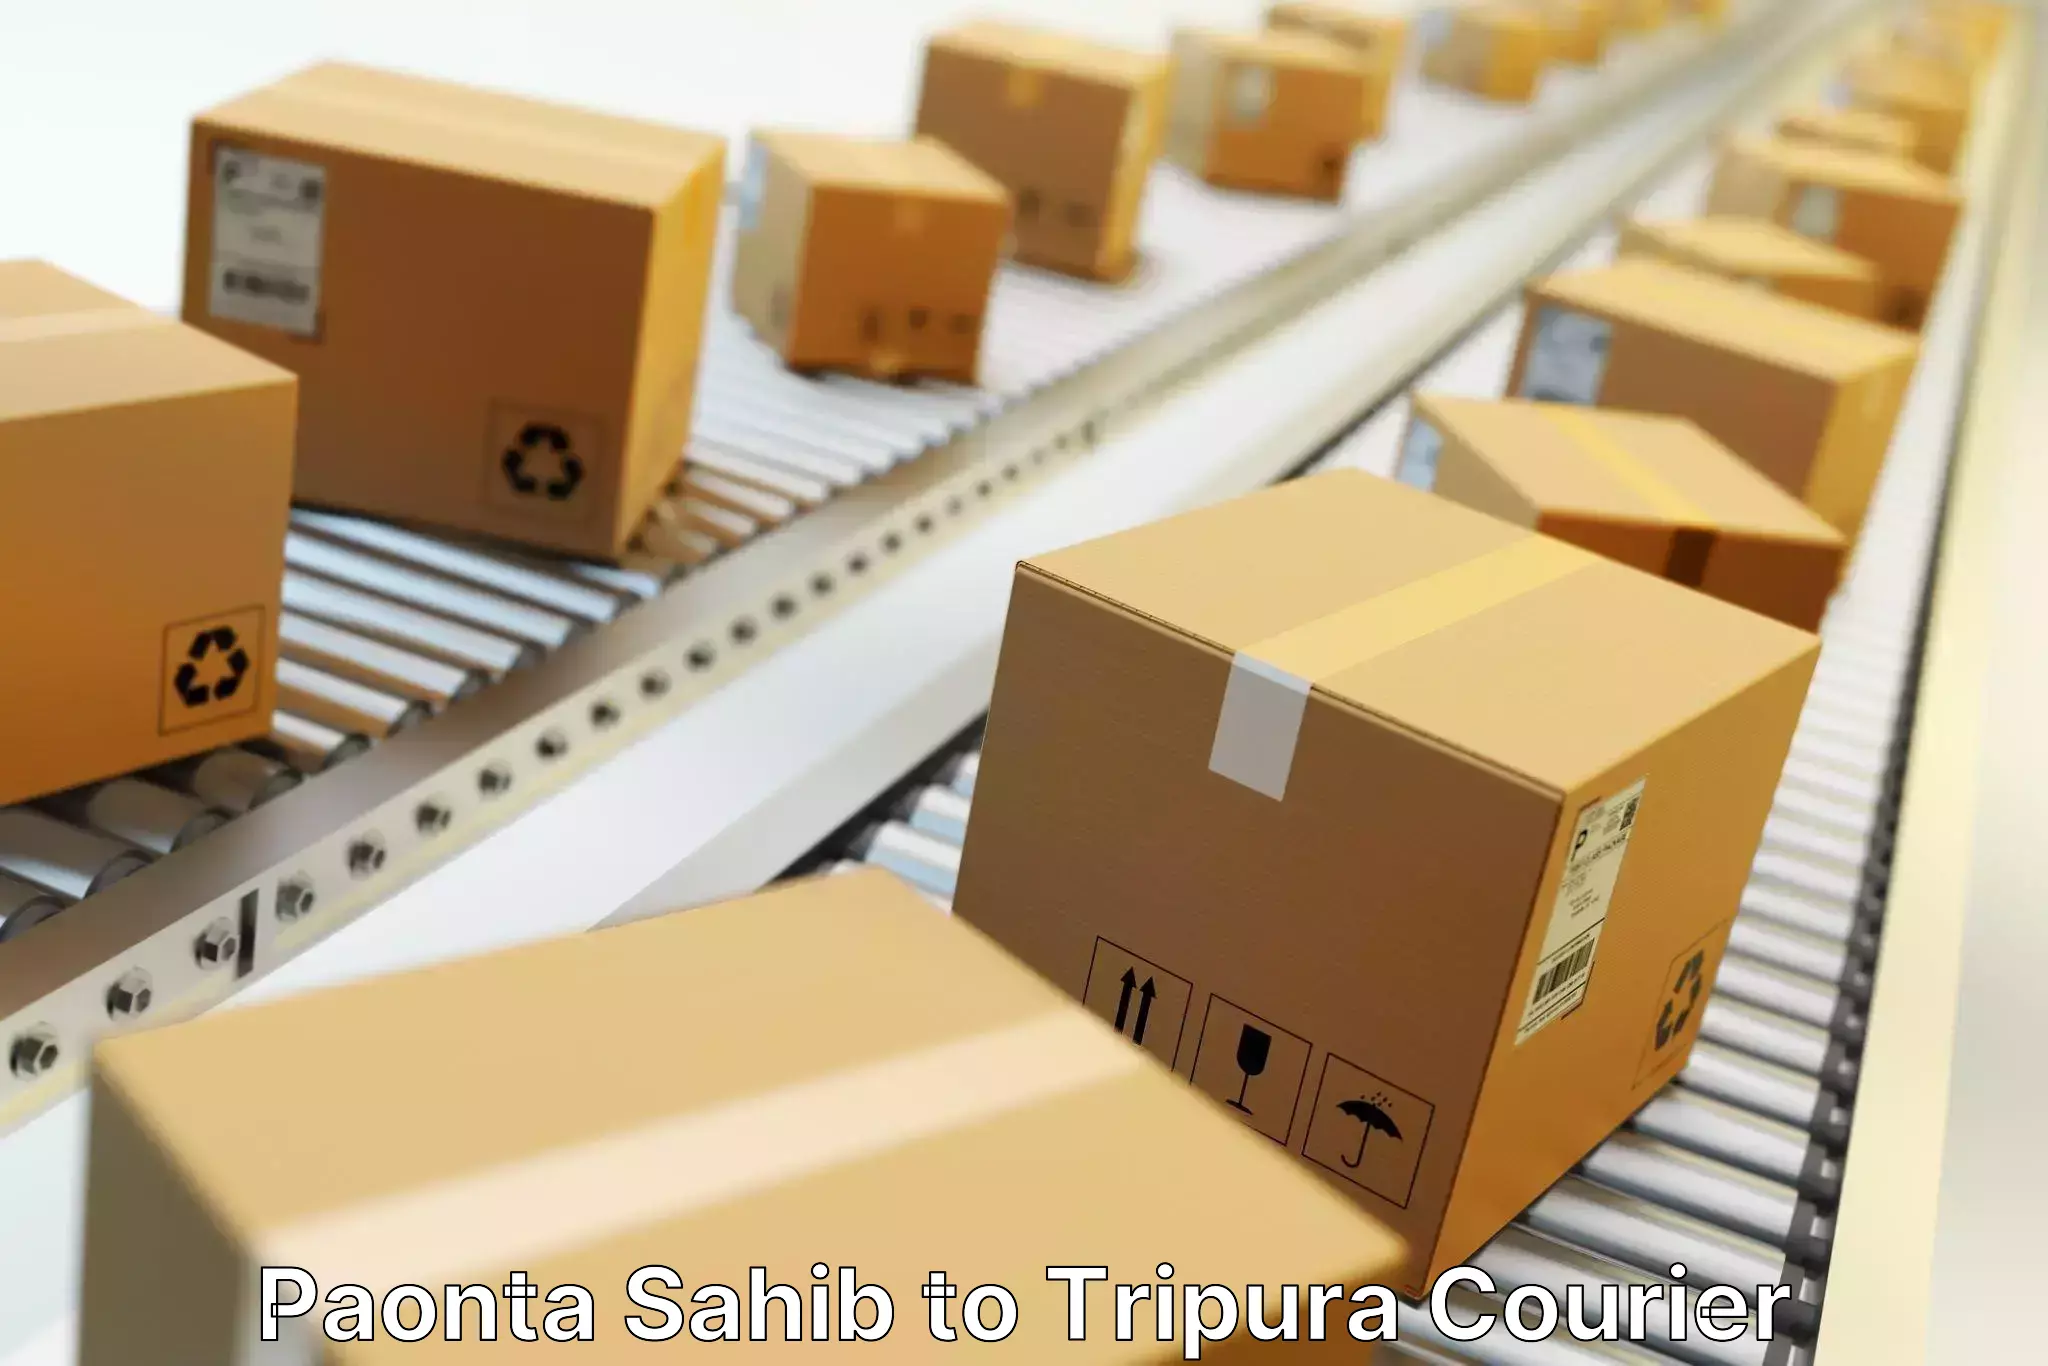 State-of-the-art courier technology Paonta Sahib to West Tripura